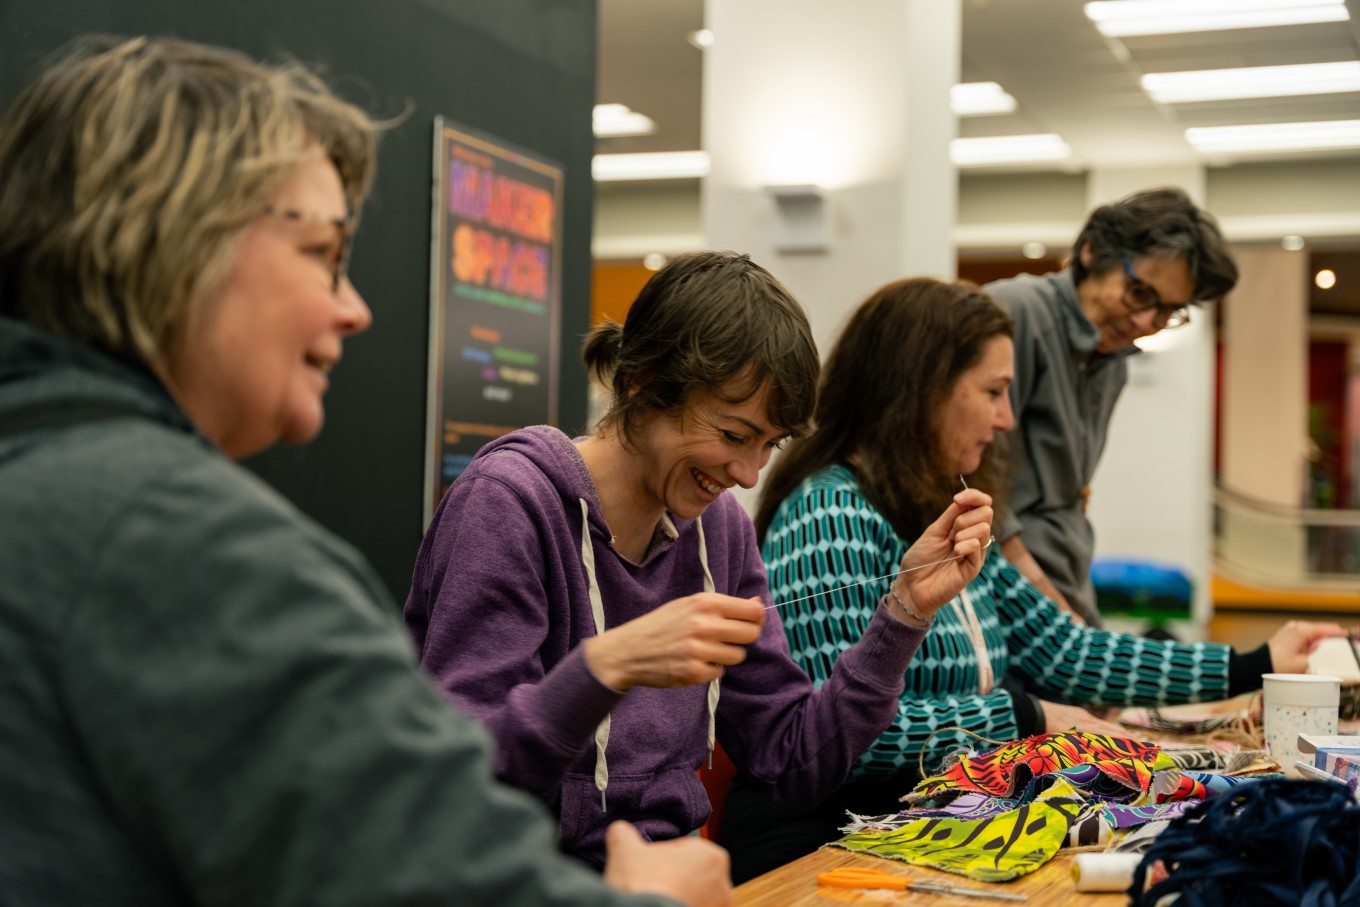 Enjoy the company of others while completing a project at one of the many craft groups run by Auckland Libraries. The UFO group (pictured above) is a group where people come together to work on unfinished objects and meets weekly at the Central City Library.